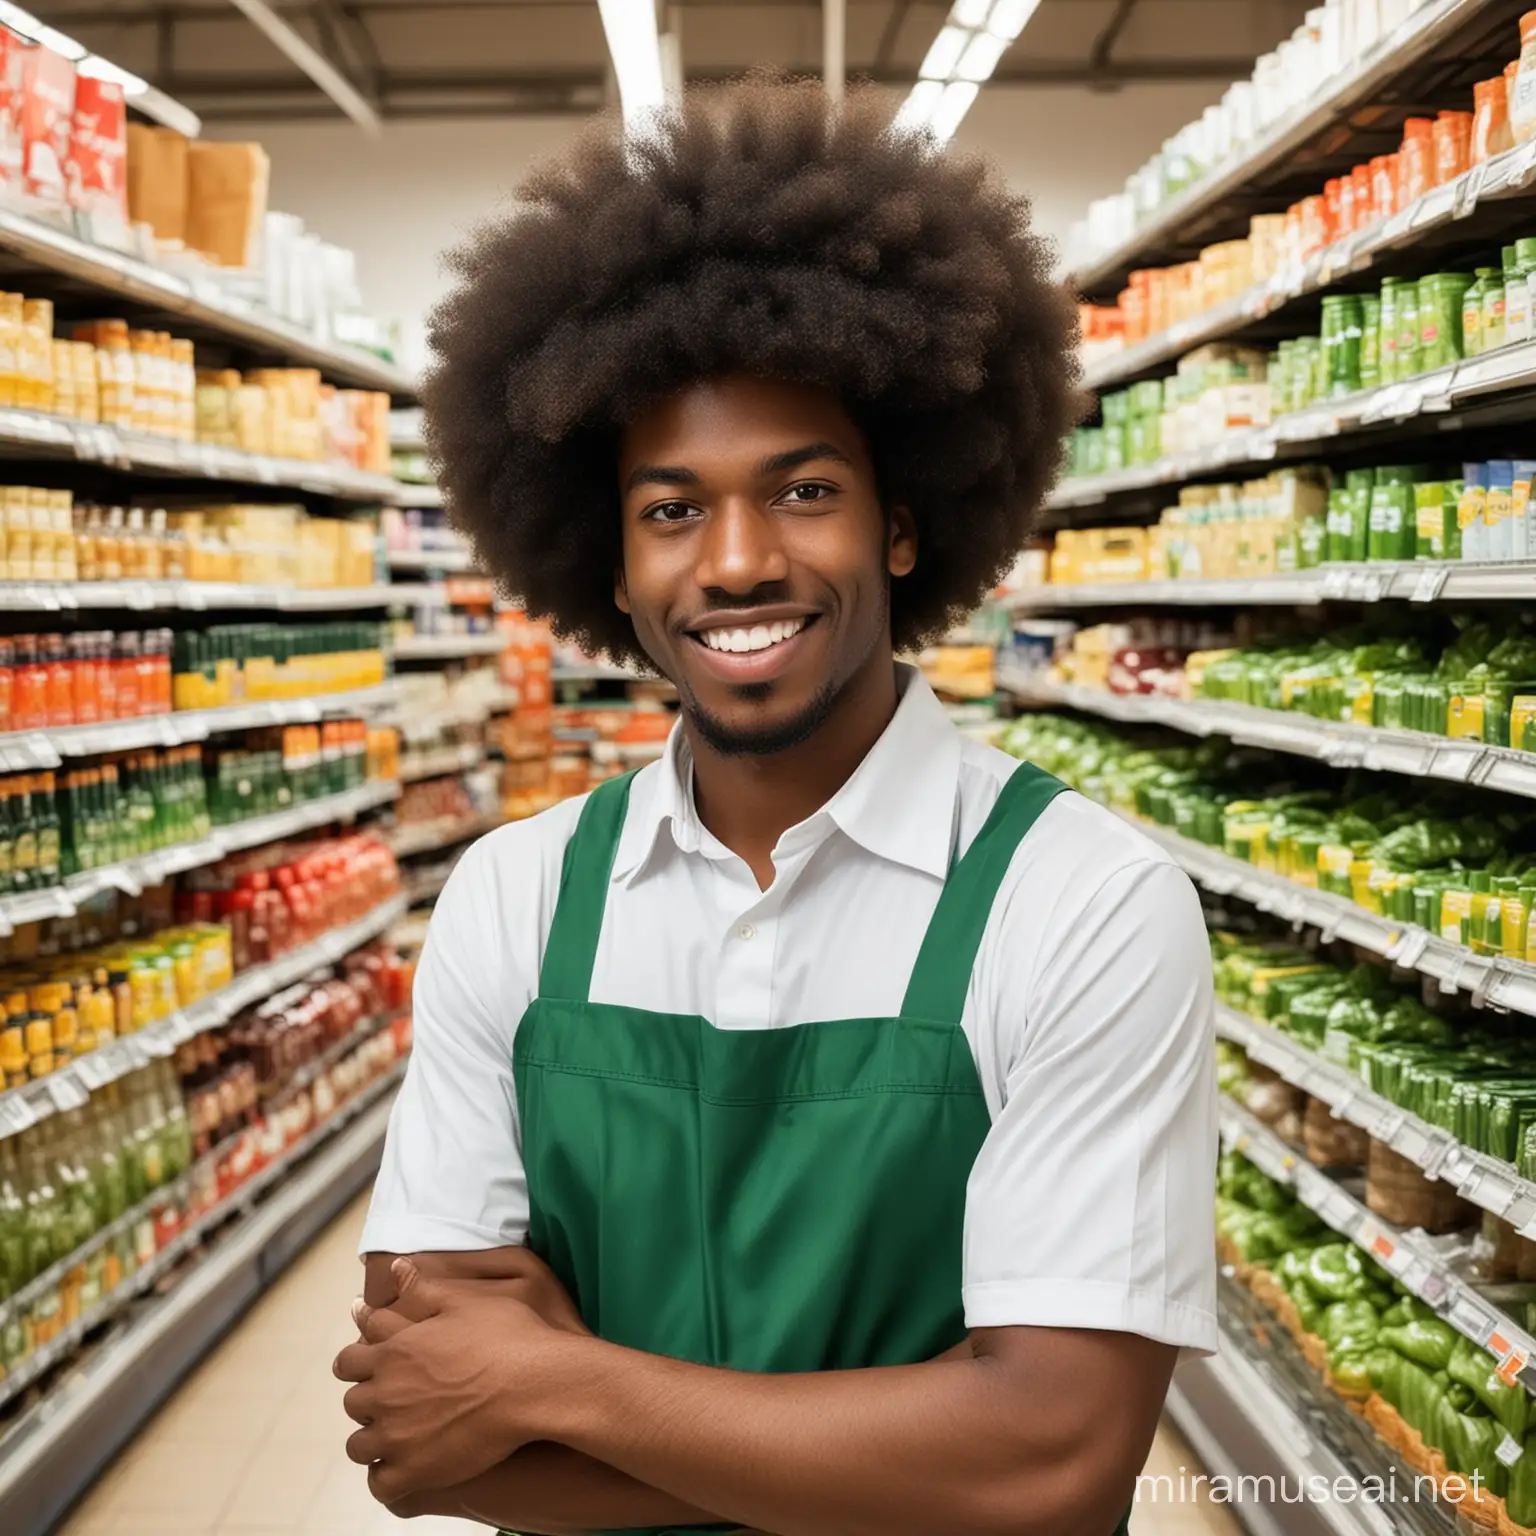 I NEED A PICTURE OF AN AFRO MAN SUPERMARKET WORKER WITH GREEN CASMISA

